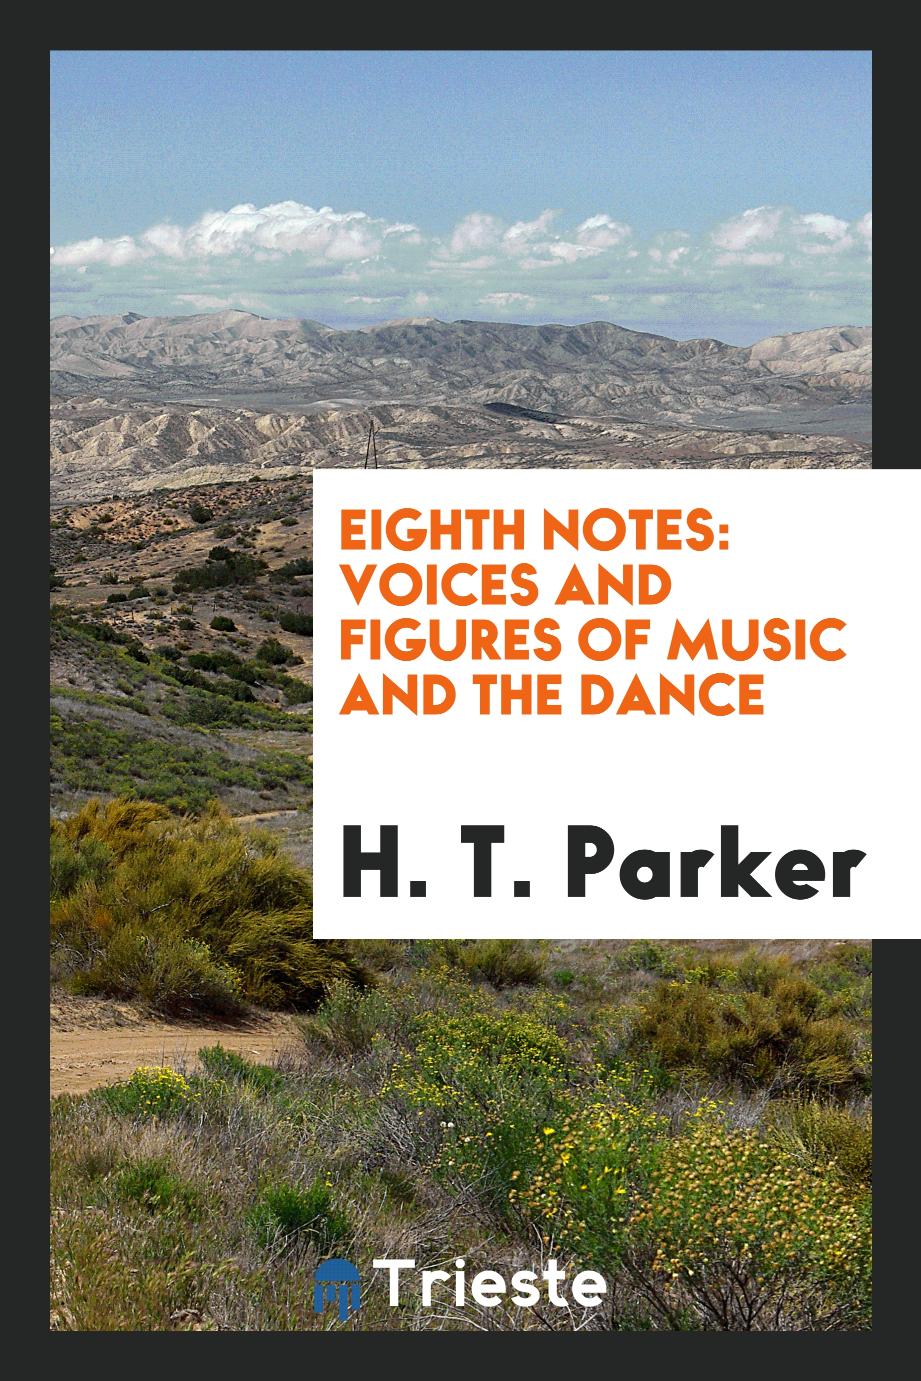 Eighth notes: voices and figures of music and the dance